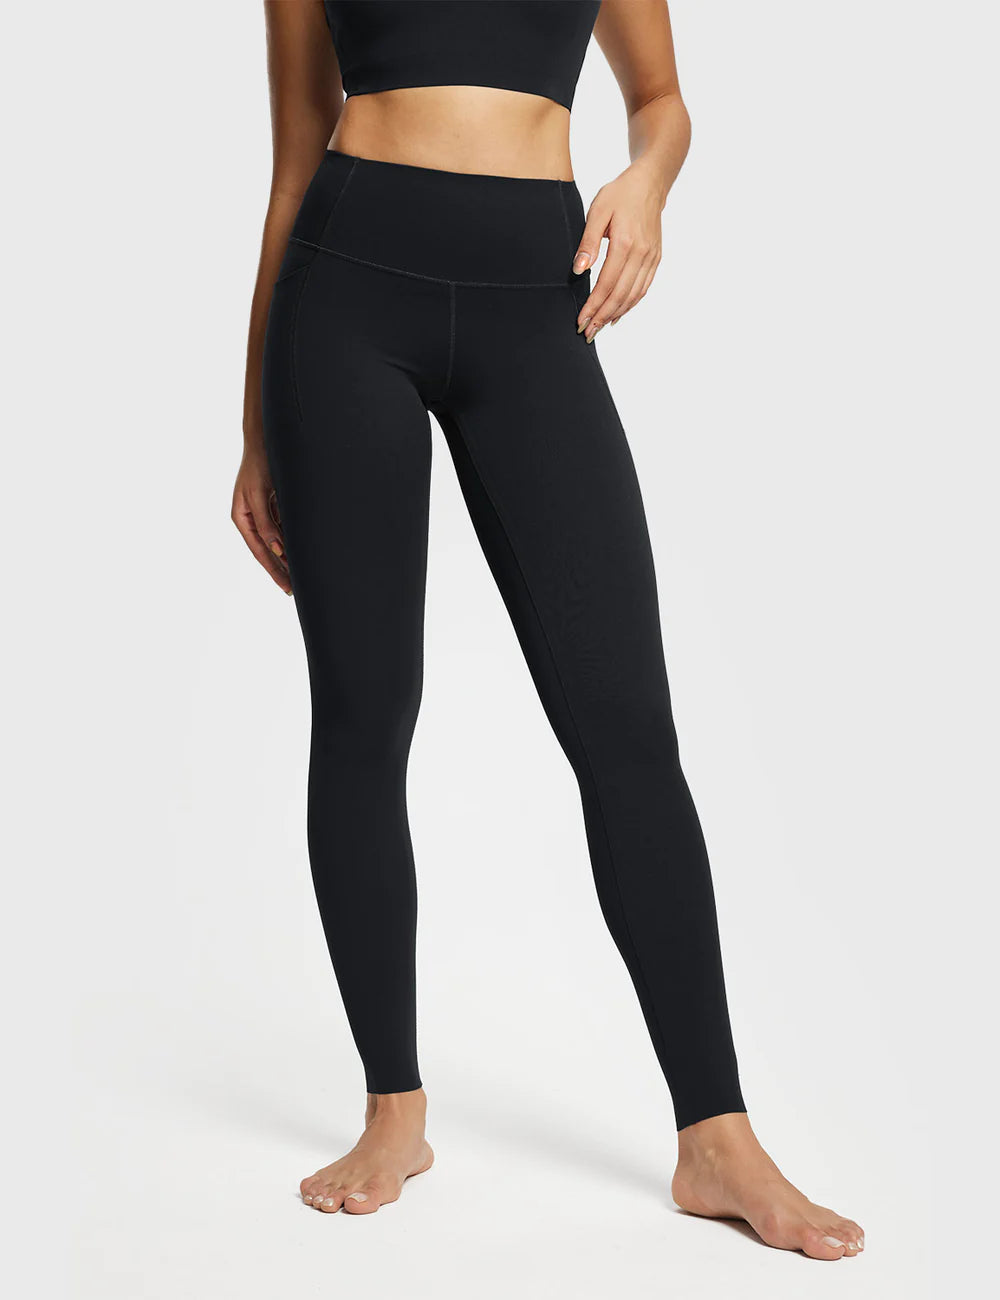 The Best Fabric for Yoga Pants: A Detailed Comparison – Baleaf Sports